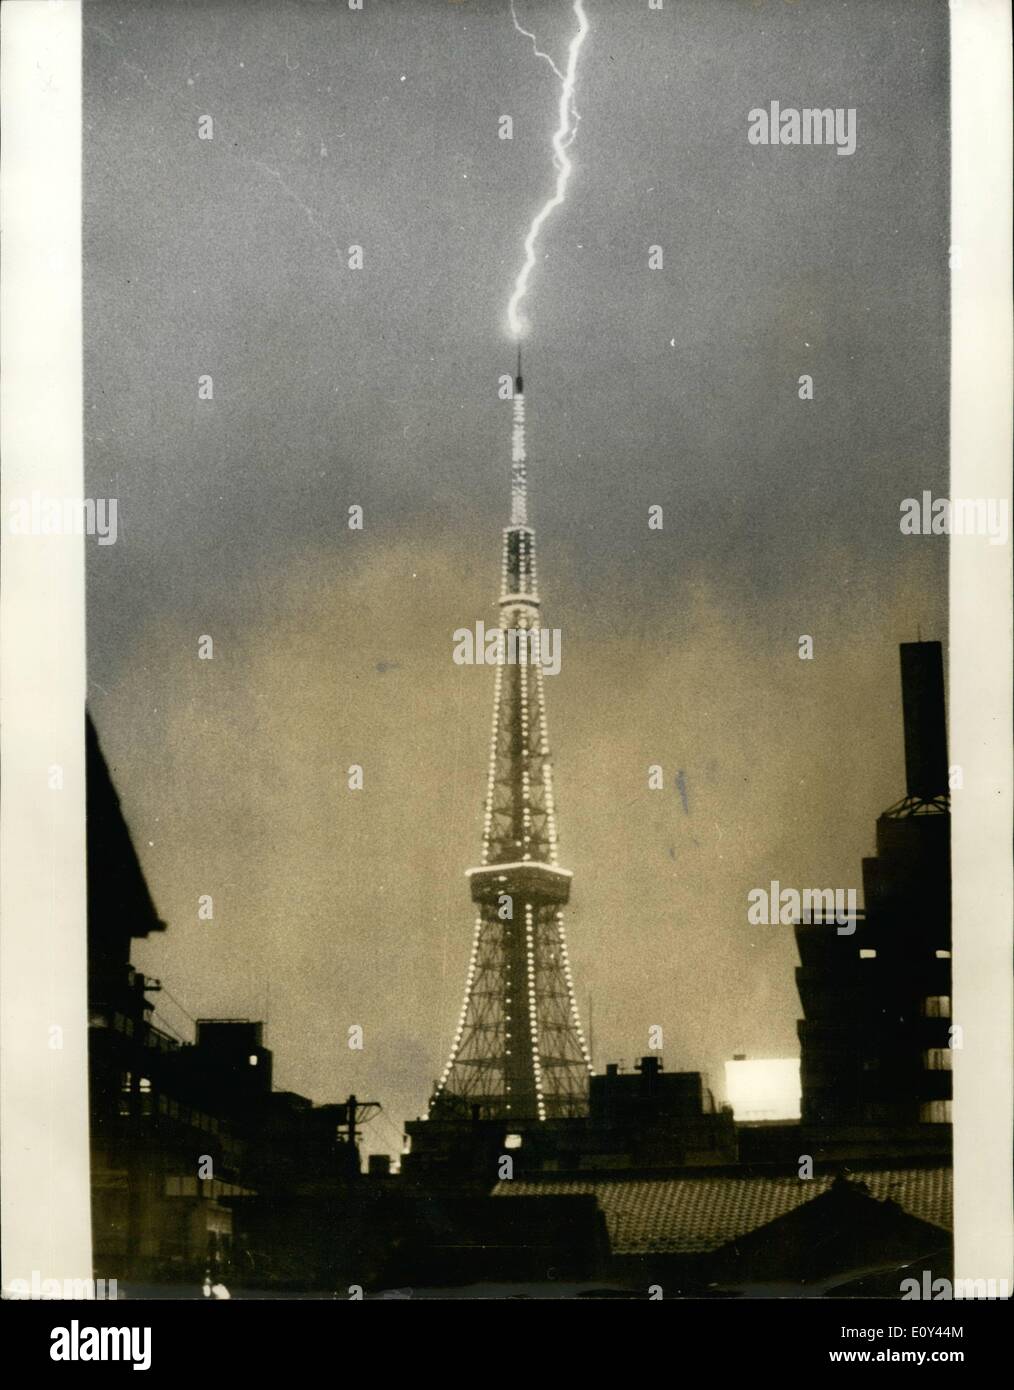 Jul. 07, 1968 - Tokyo Tower Struck By Lighting Remarkable Picture By Professional Golfer: This unusual picture showing ;lighting striking the very top of Tokyo Tower -the tallest tower in the World - was taken during a recent by Mr. Liem Fords, Chief golf professional at the Kanagawa Country Club in Japan, from a friend's apartment near the tower. He set his camera up when he storm started and gave 1/4 second expouser at 1:1.8, with a 55mm lens, and using a cable release, Mr. Forde, an Irishman born at Bray, Stock Photo